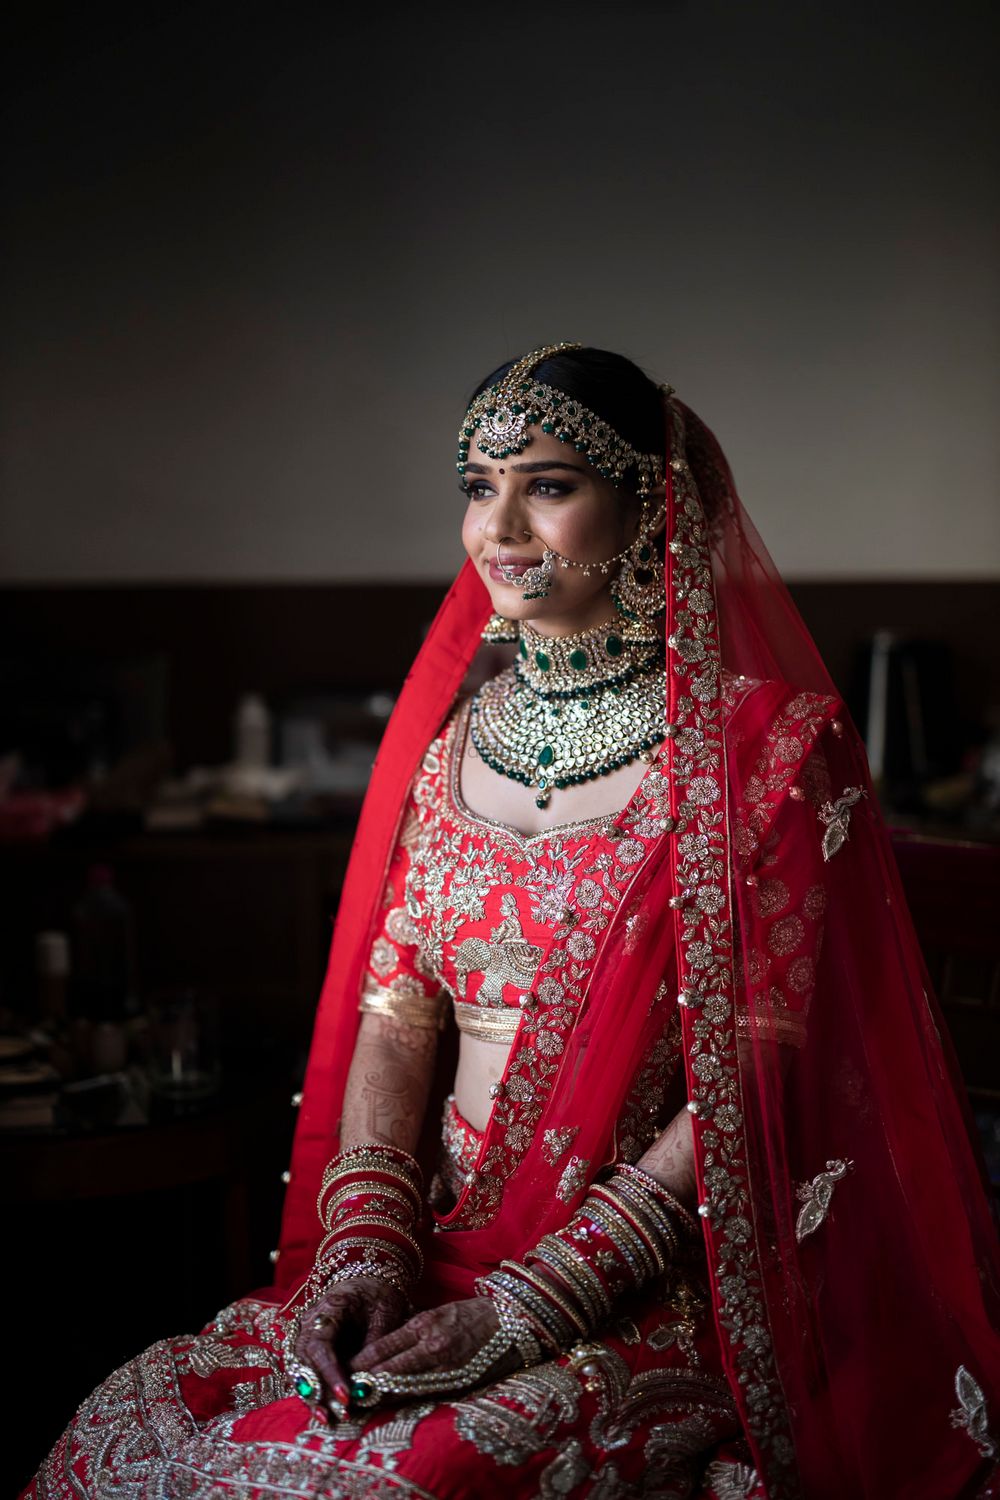 Photo of North Indian bride in red lehenga and contrasting jewellery